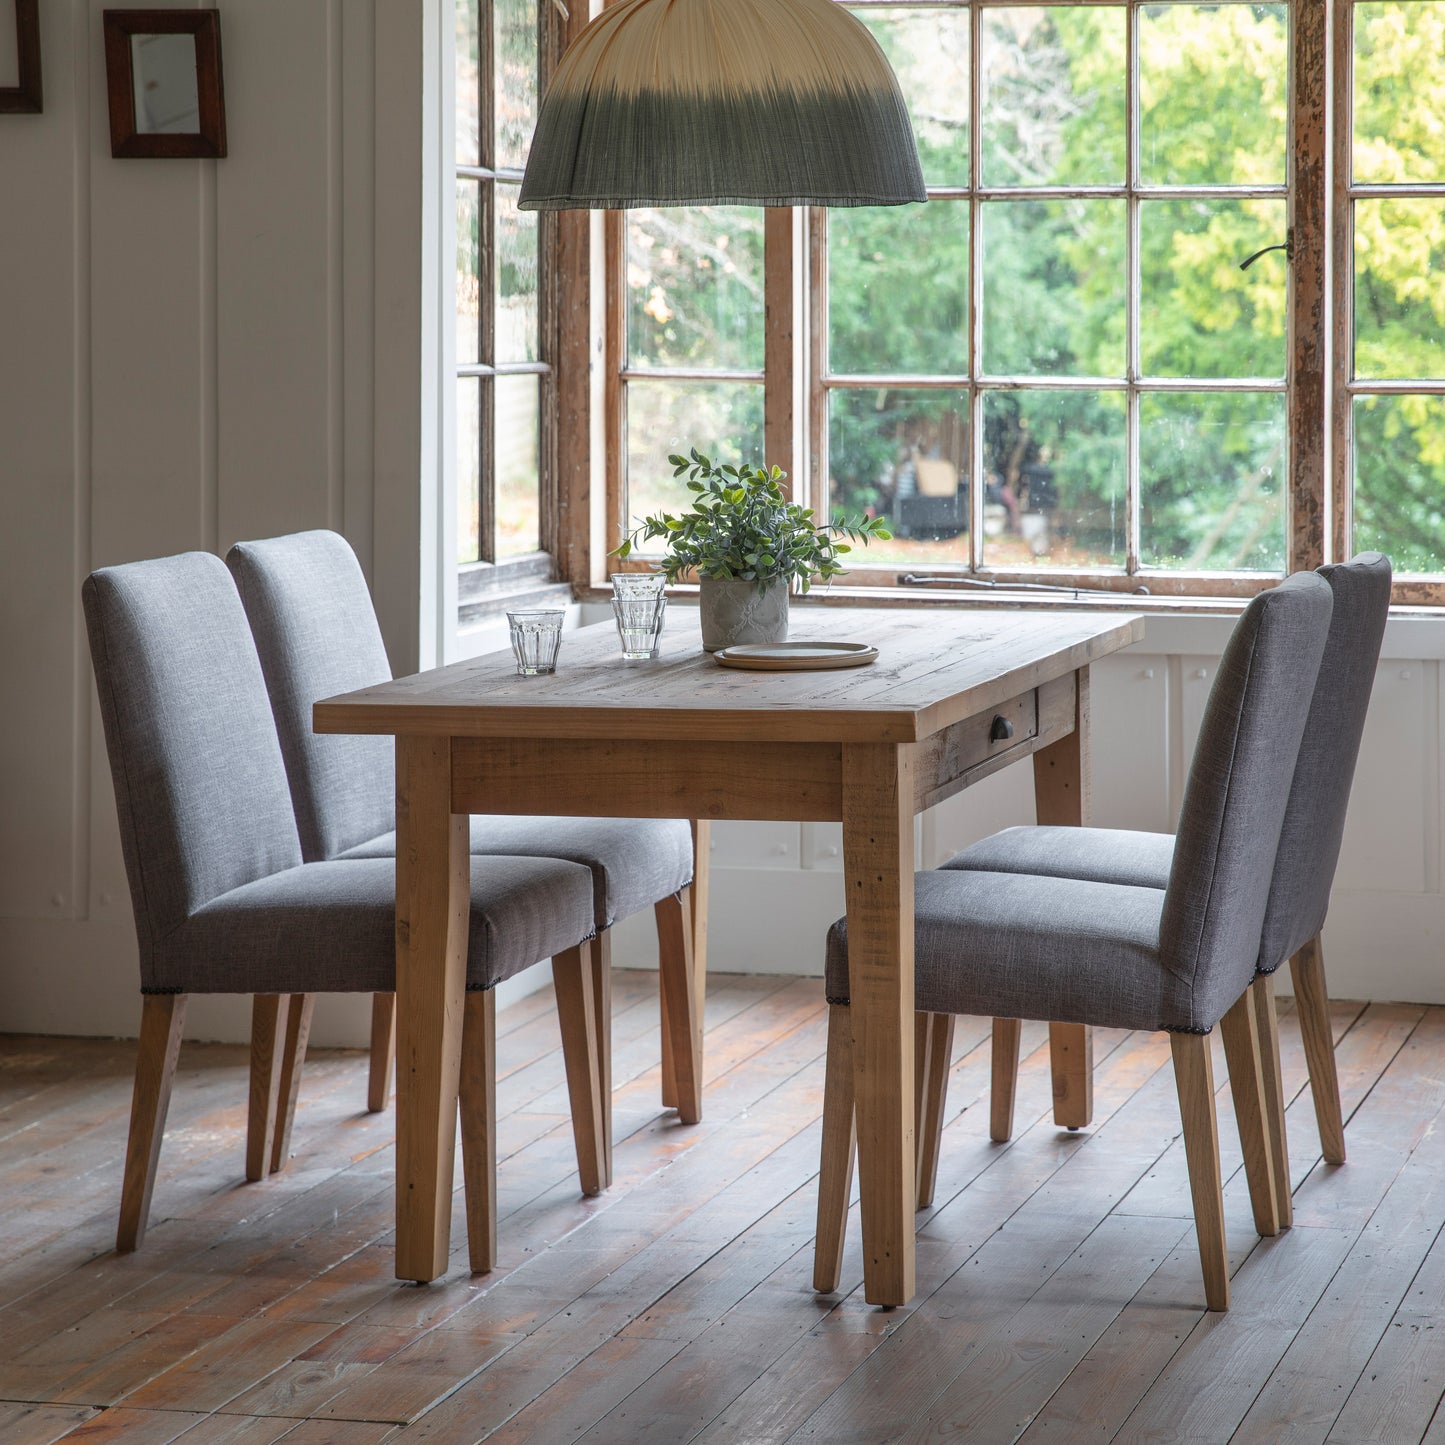 Load image into Gallery viewer, A dining room furnished with a Marldon 1 Drawer Dining Table and chairs from Kikiathome.co.uk, enhancing the interior decor with stylish home furniture.
